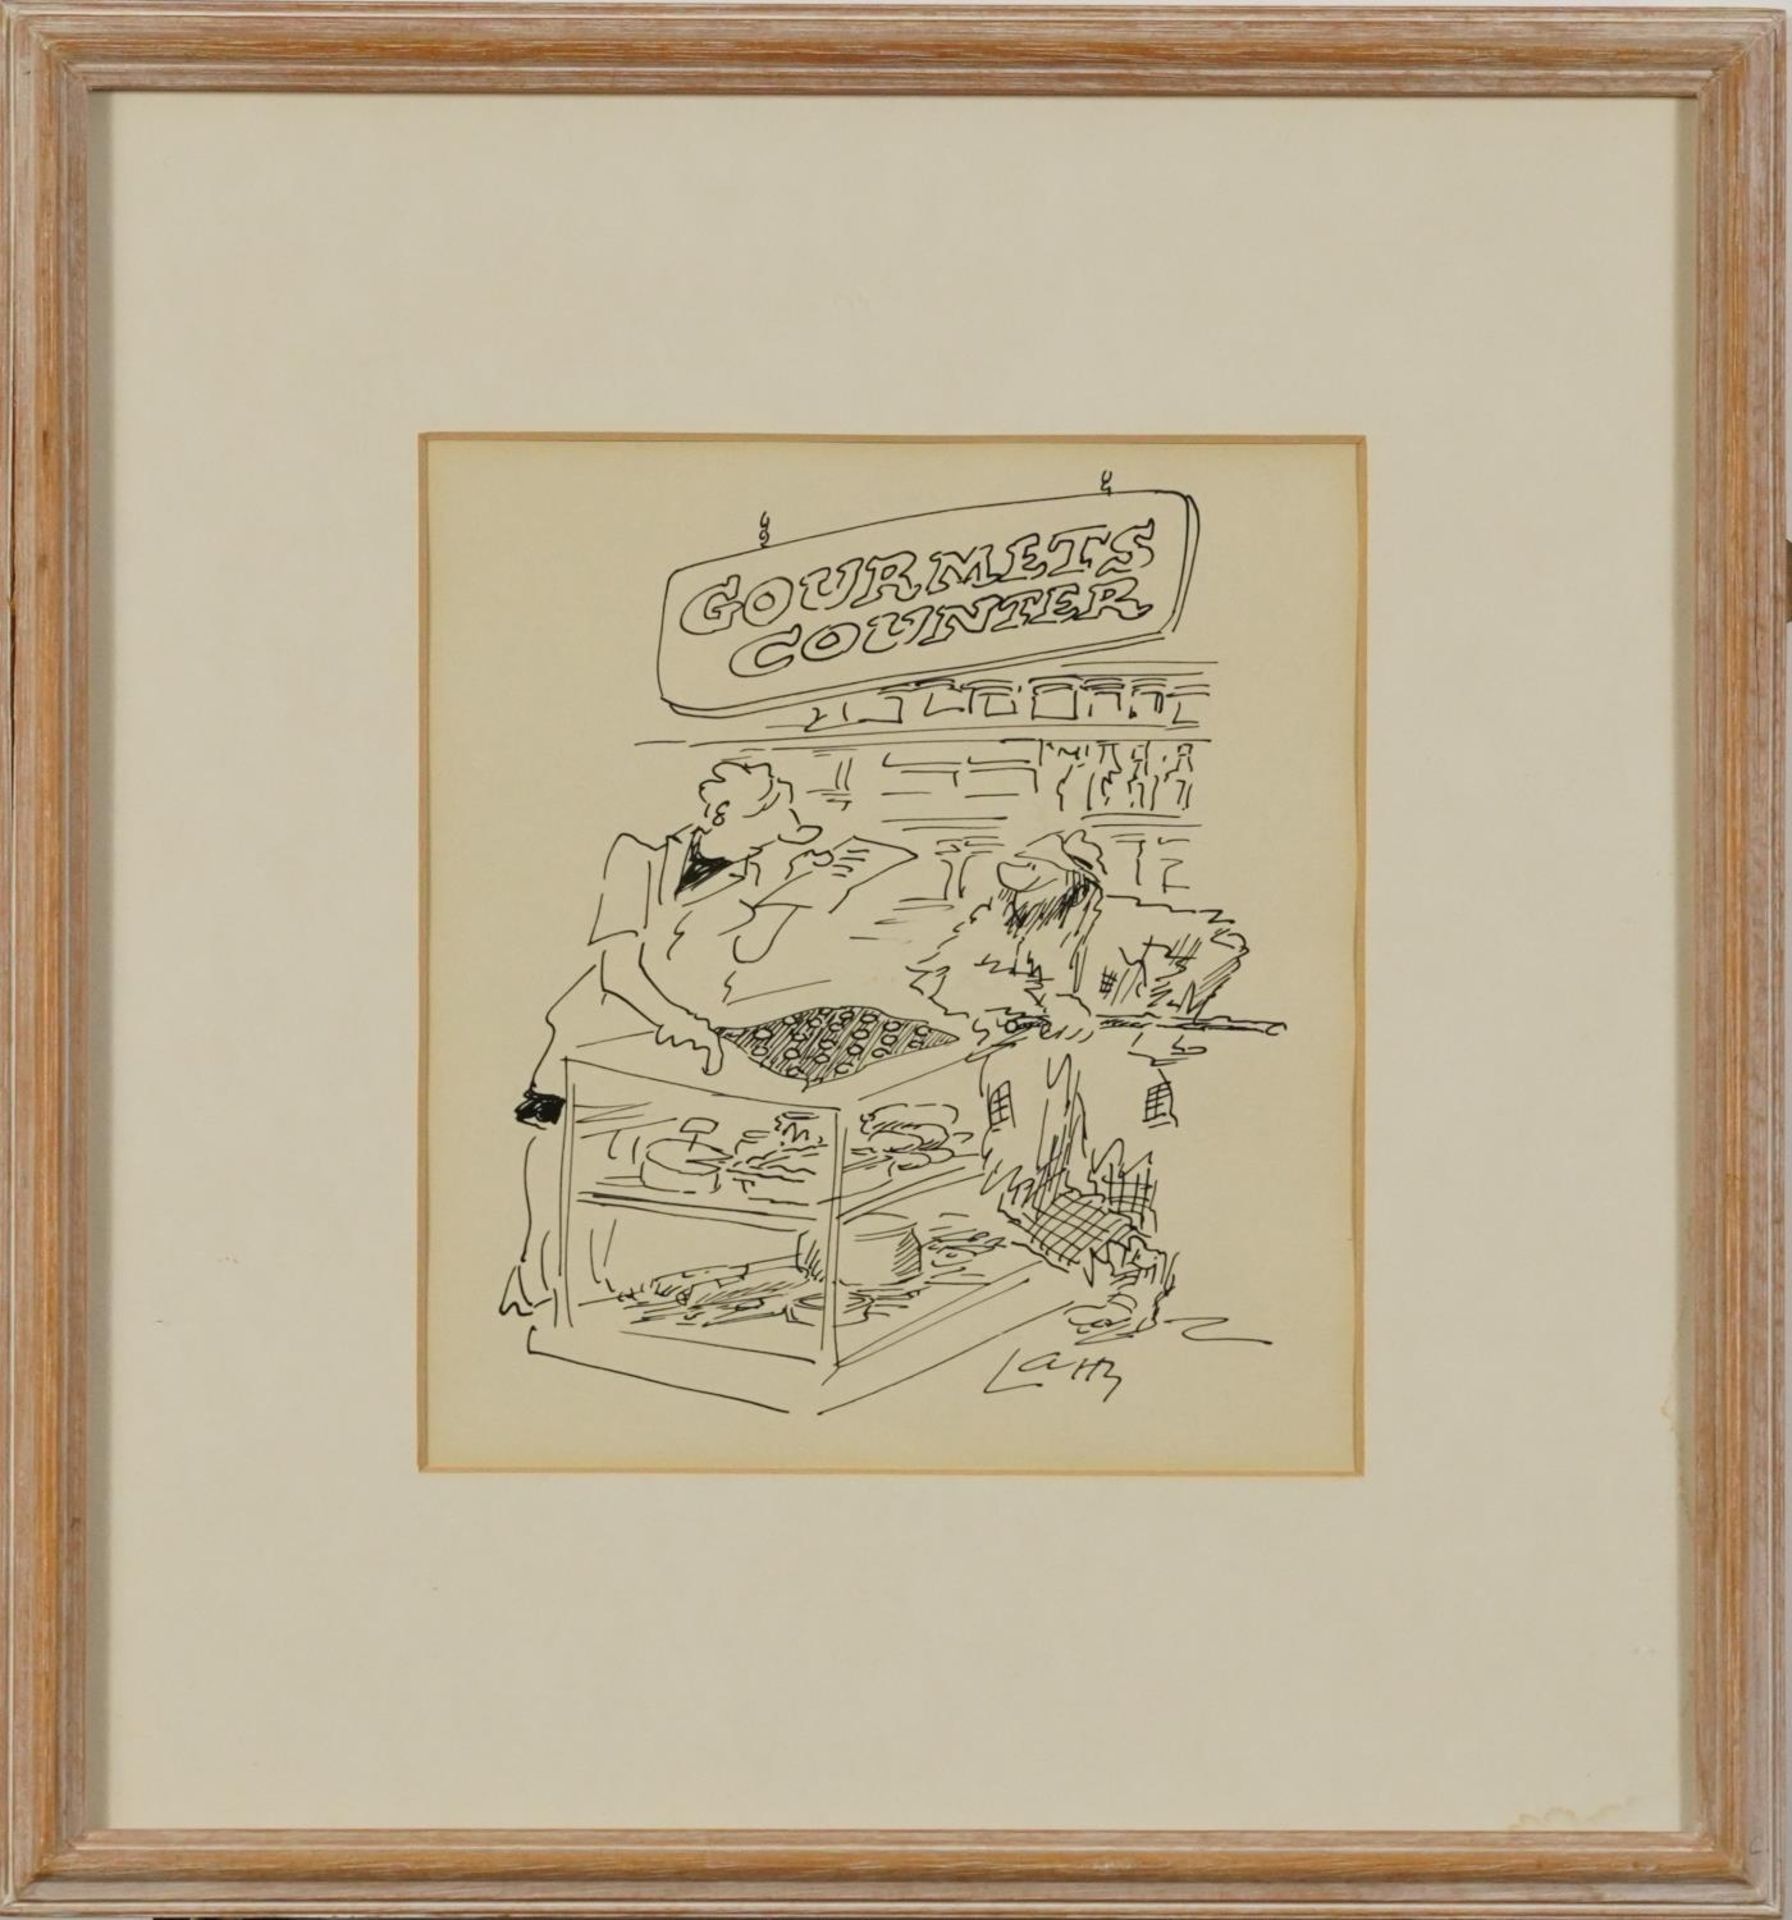 Terence Larry Parkes - Gourmet Counter, ink illustration, inscribed verso, mounted, framed and - Image 2 of 5